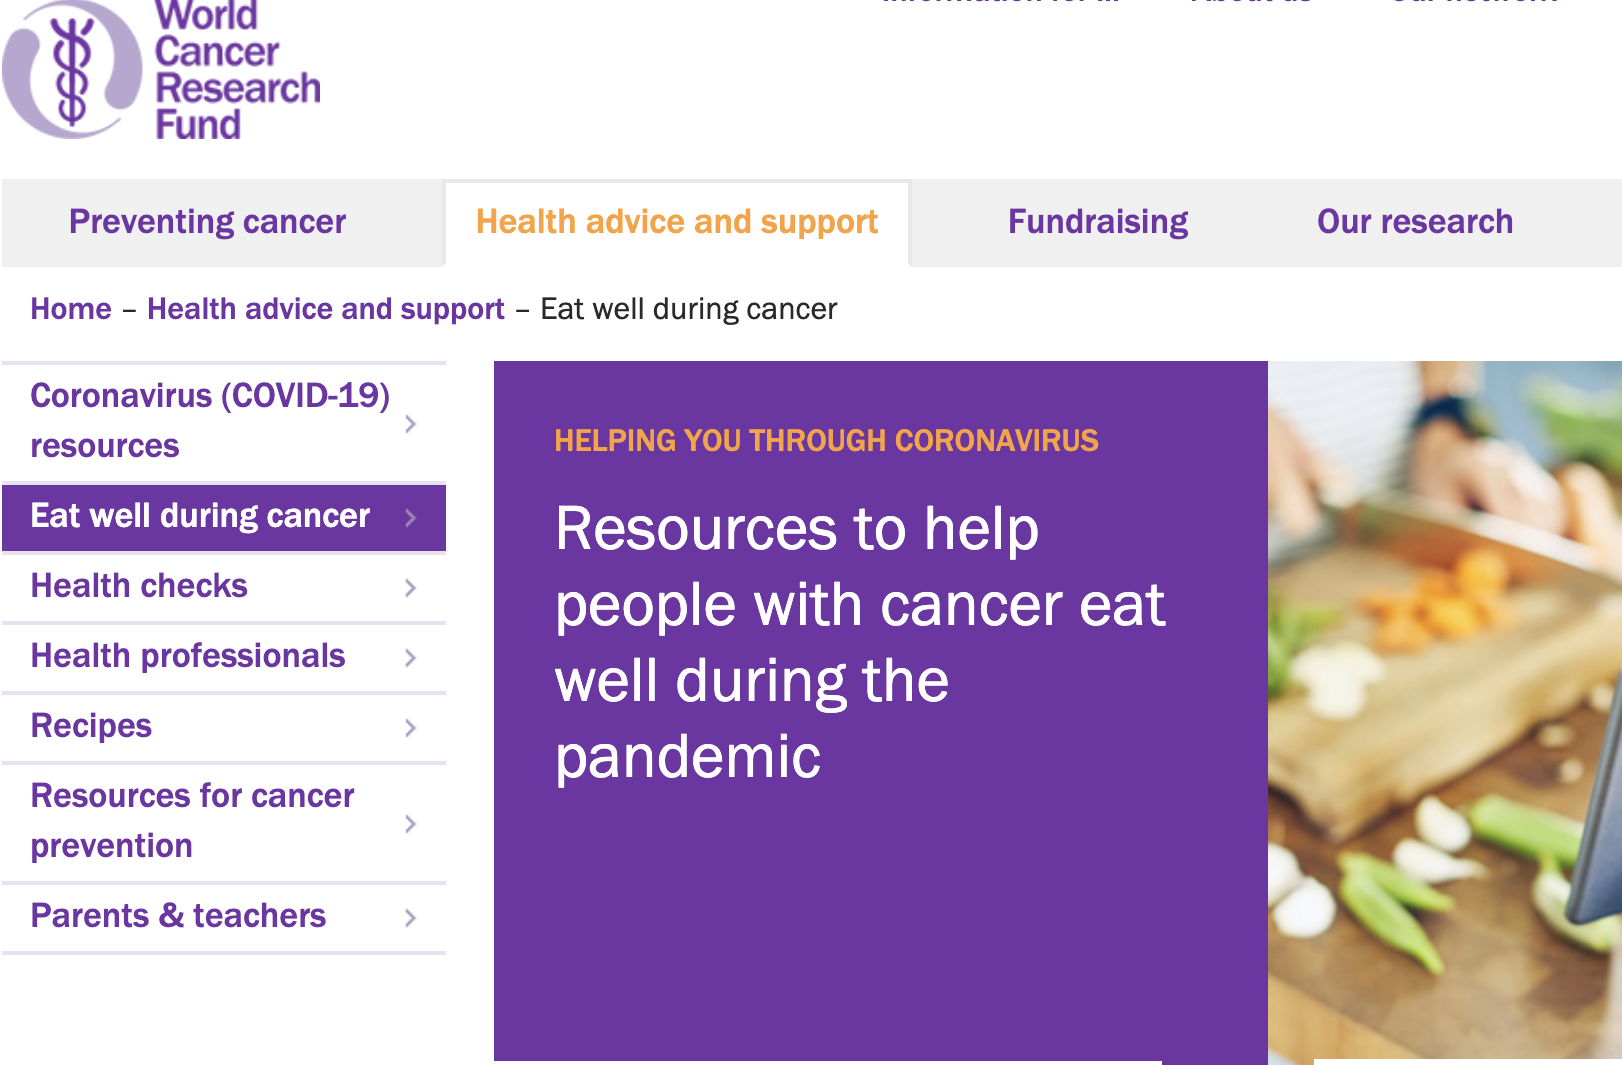 World Cancer Research Fund web page